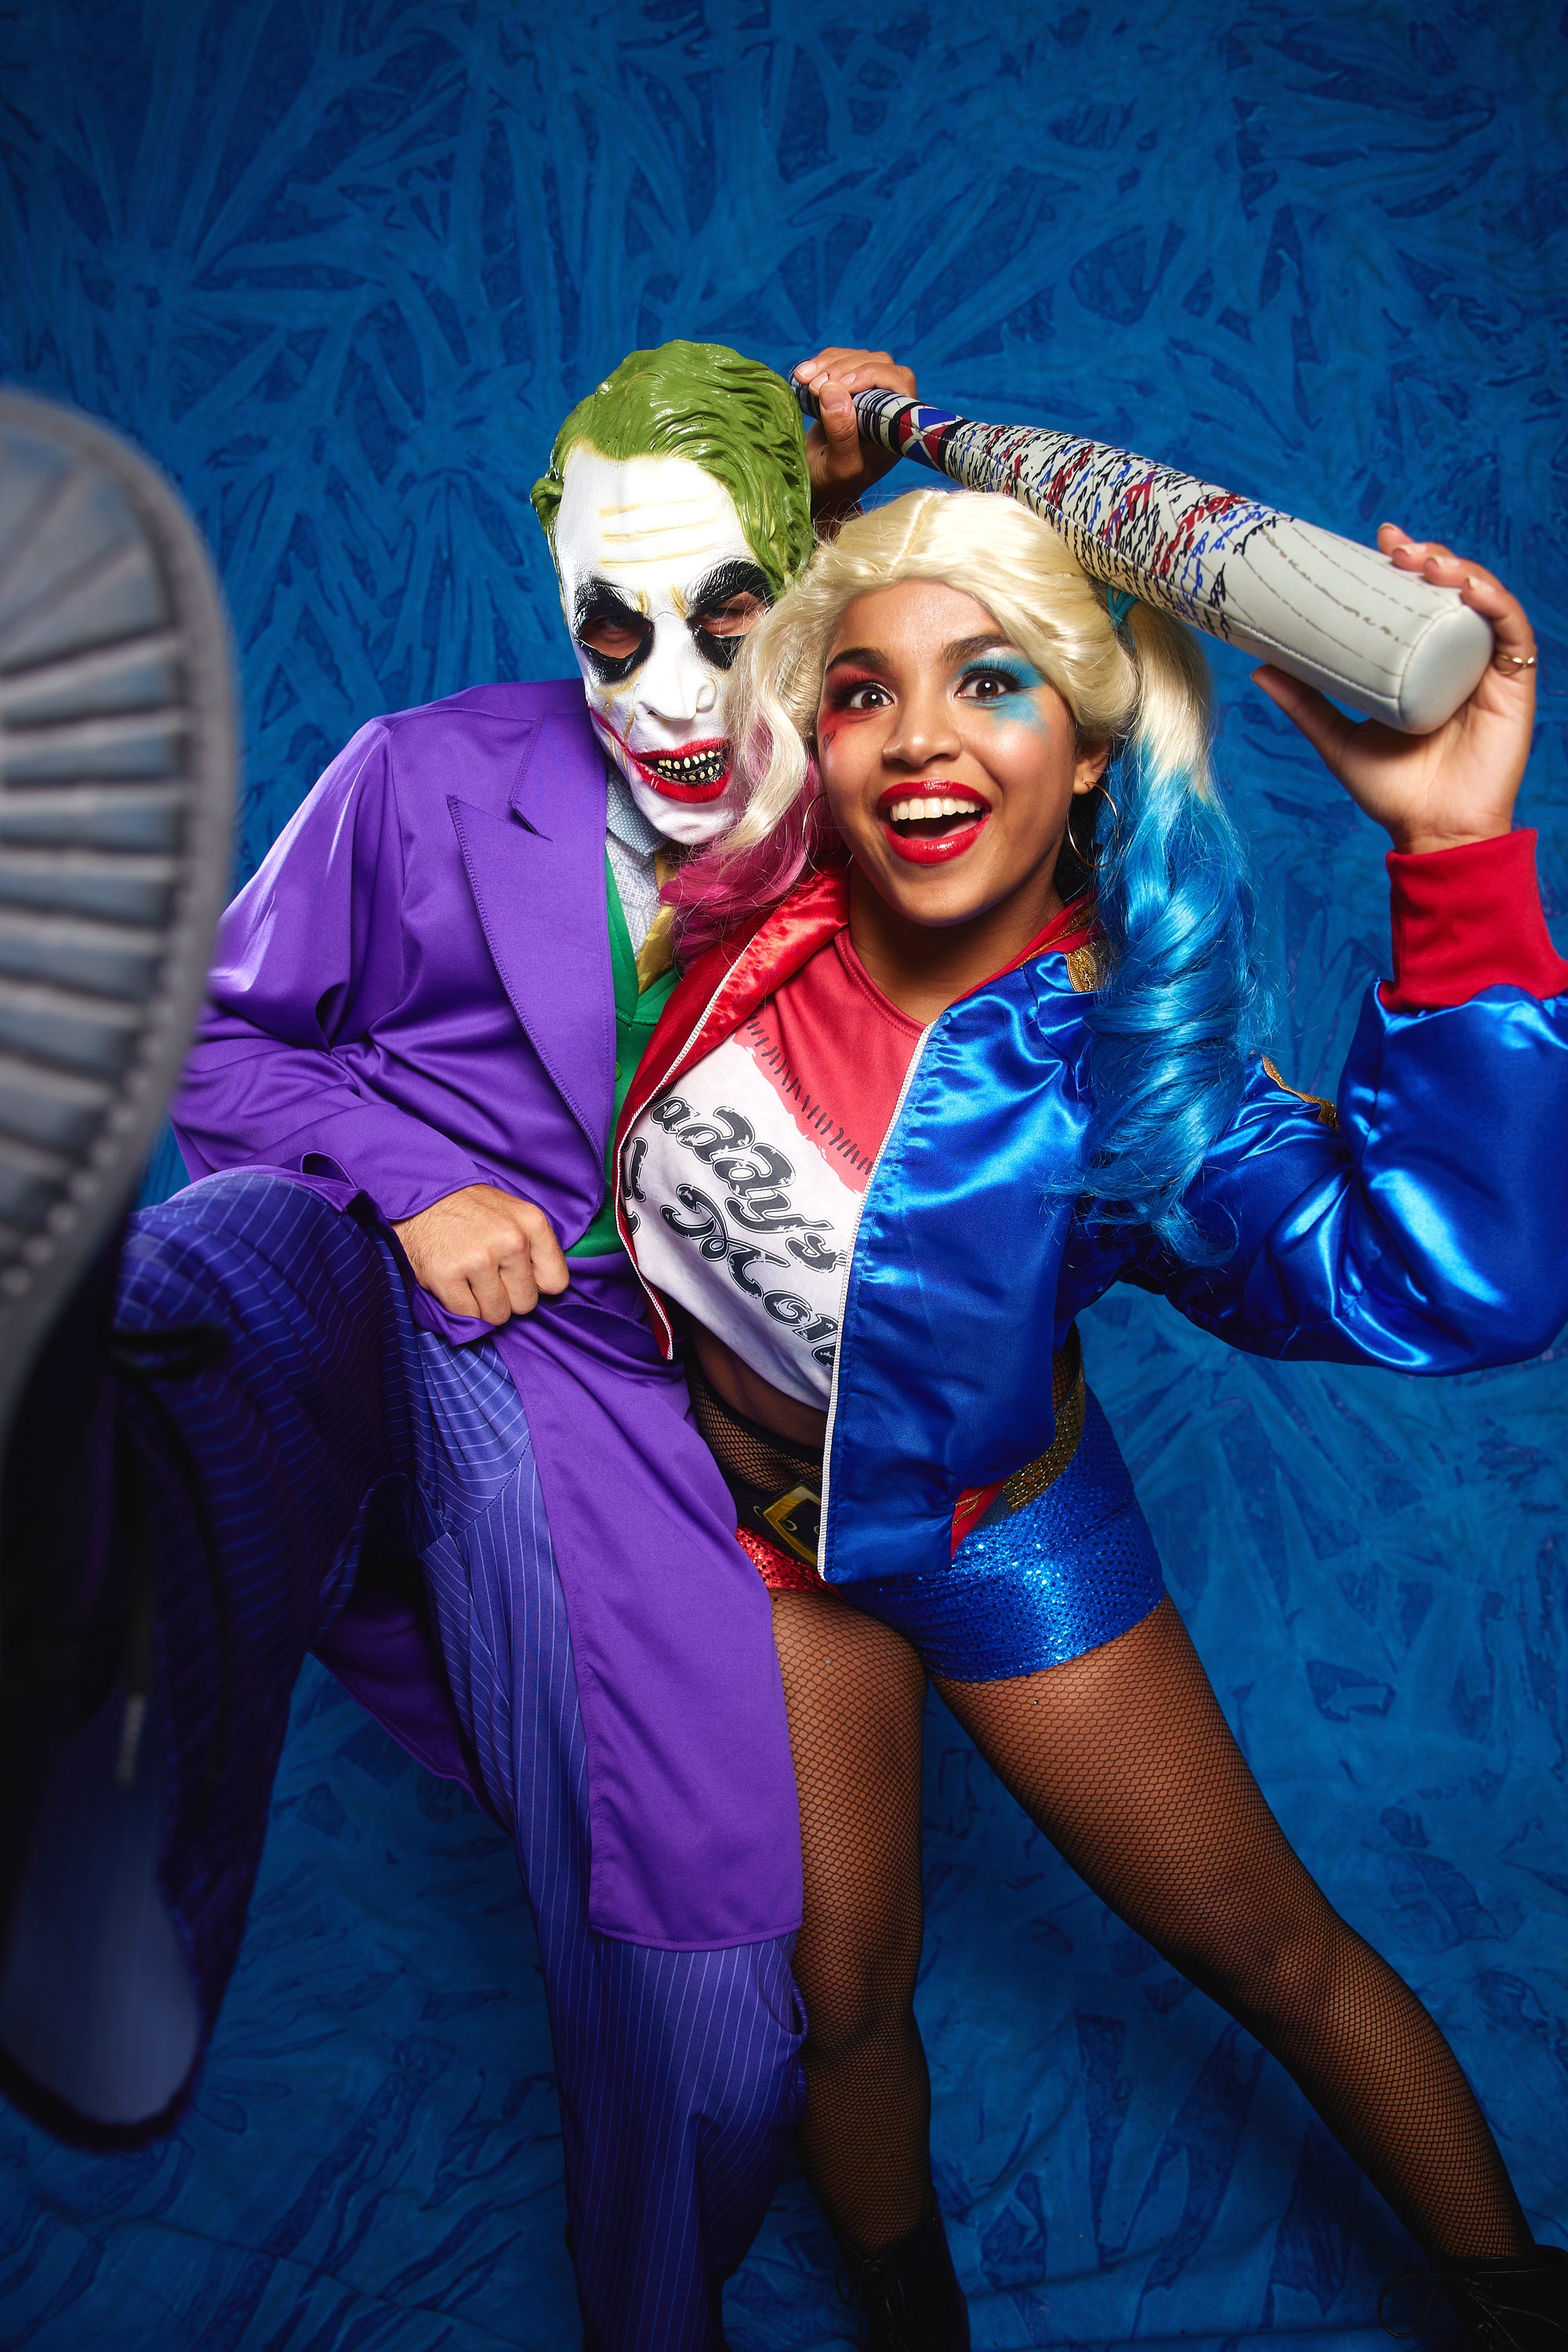 The Joker and Harley Quinn Halloween couple costumes